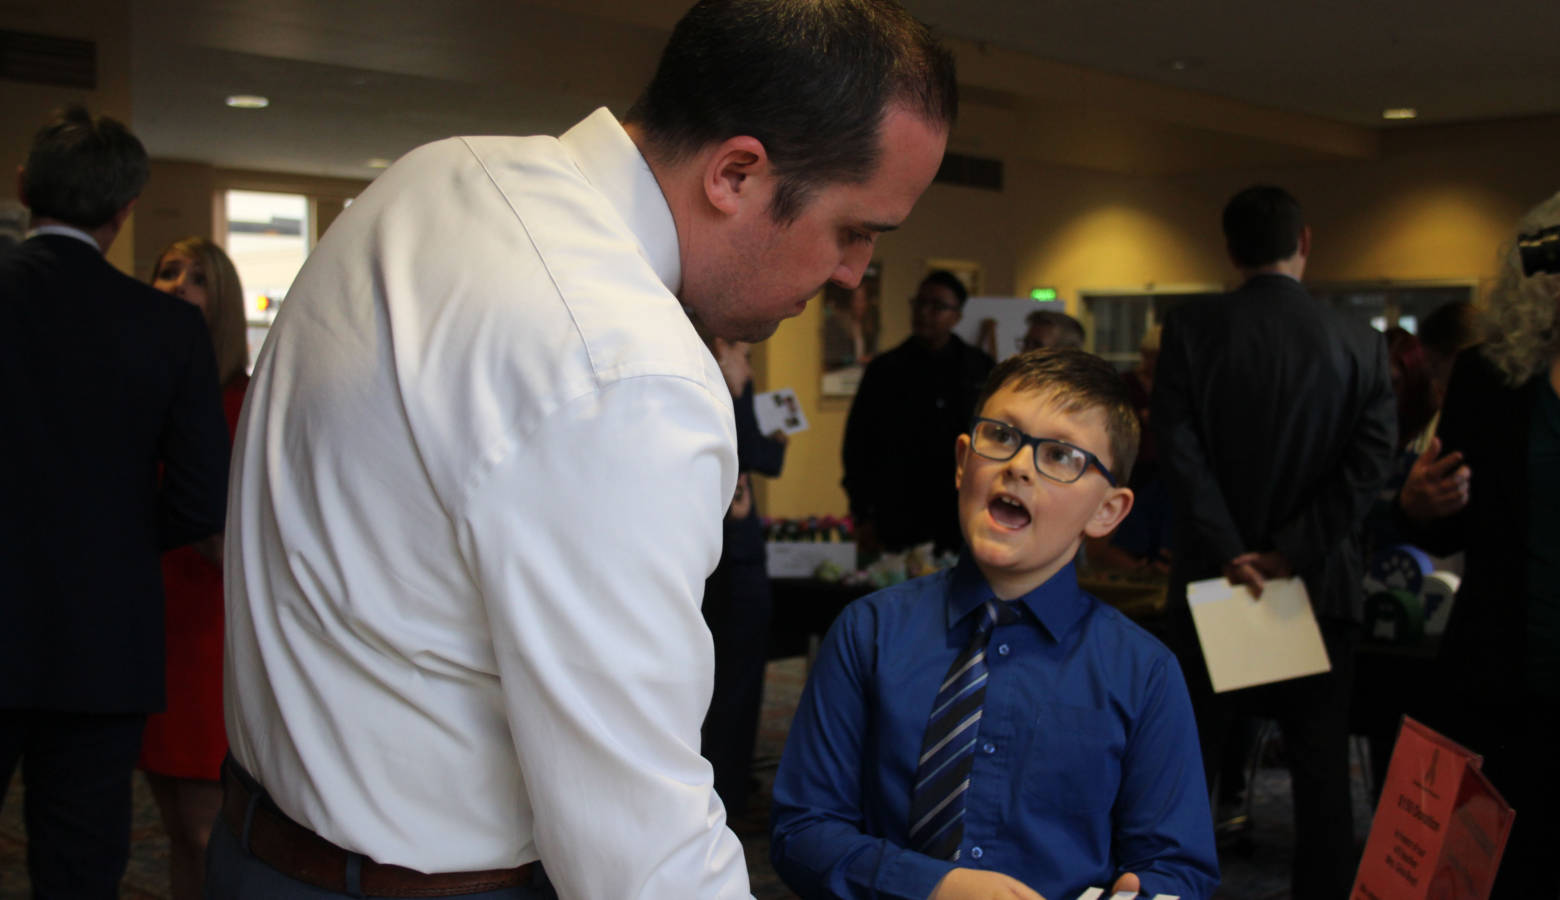 Mayflower Mill Elementary School third grader David Rowe explains his classroom's business to volunteer business judge First Merchants Bank Commercial Relationship Manager Vice President Greg Whited. (Samantha Horton/IPB News)